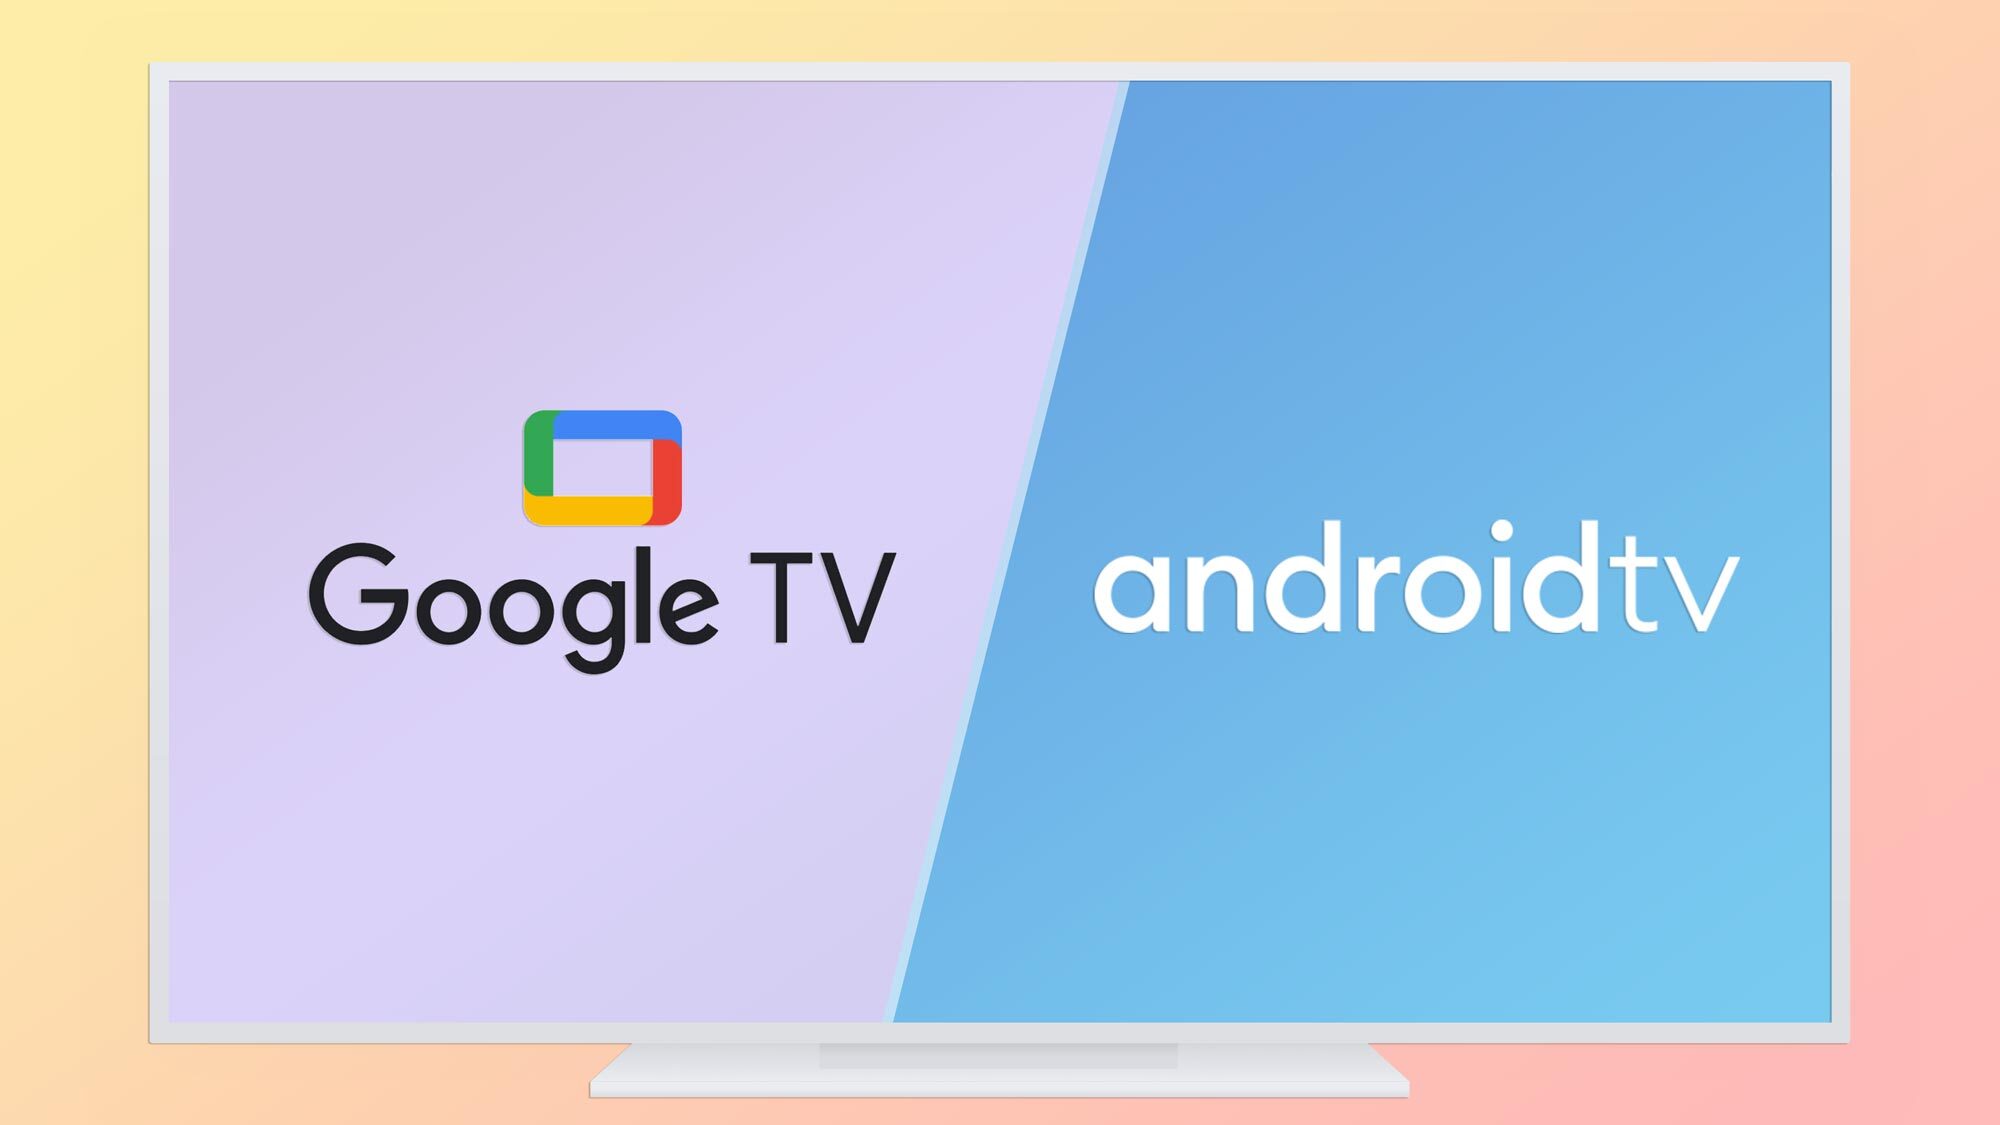 Google TV vs. Android TV: What's the difference? | Tom's Guide